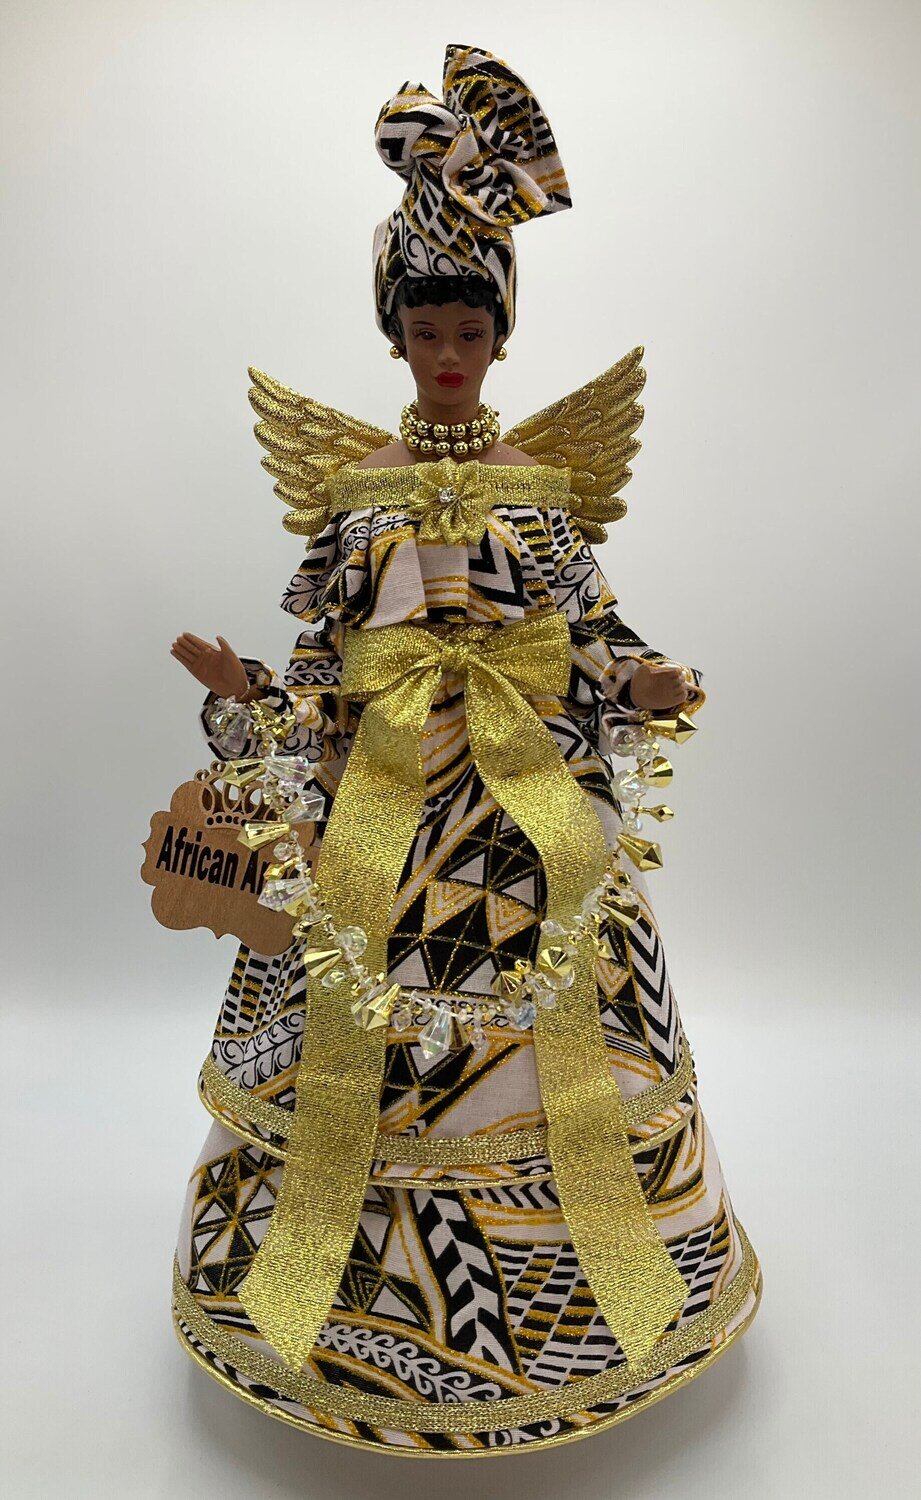 Angel Tree Topper, Gold Christmas Decor, Christmas Angels, Afrocentric Angel Tree Topper, Black Angel - Ankara White, Black and Gold, African Angel with or without Display Case: African Queen Angel Treetopper